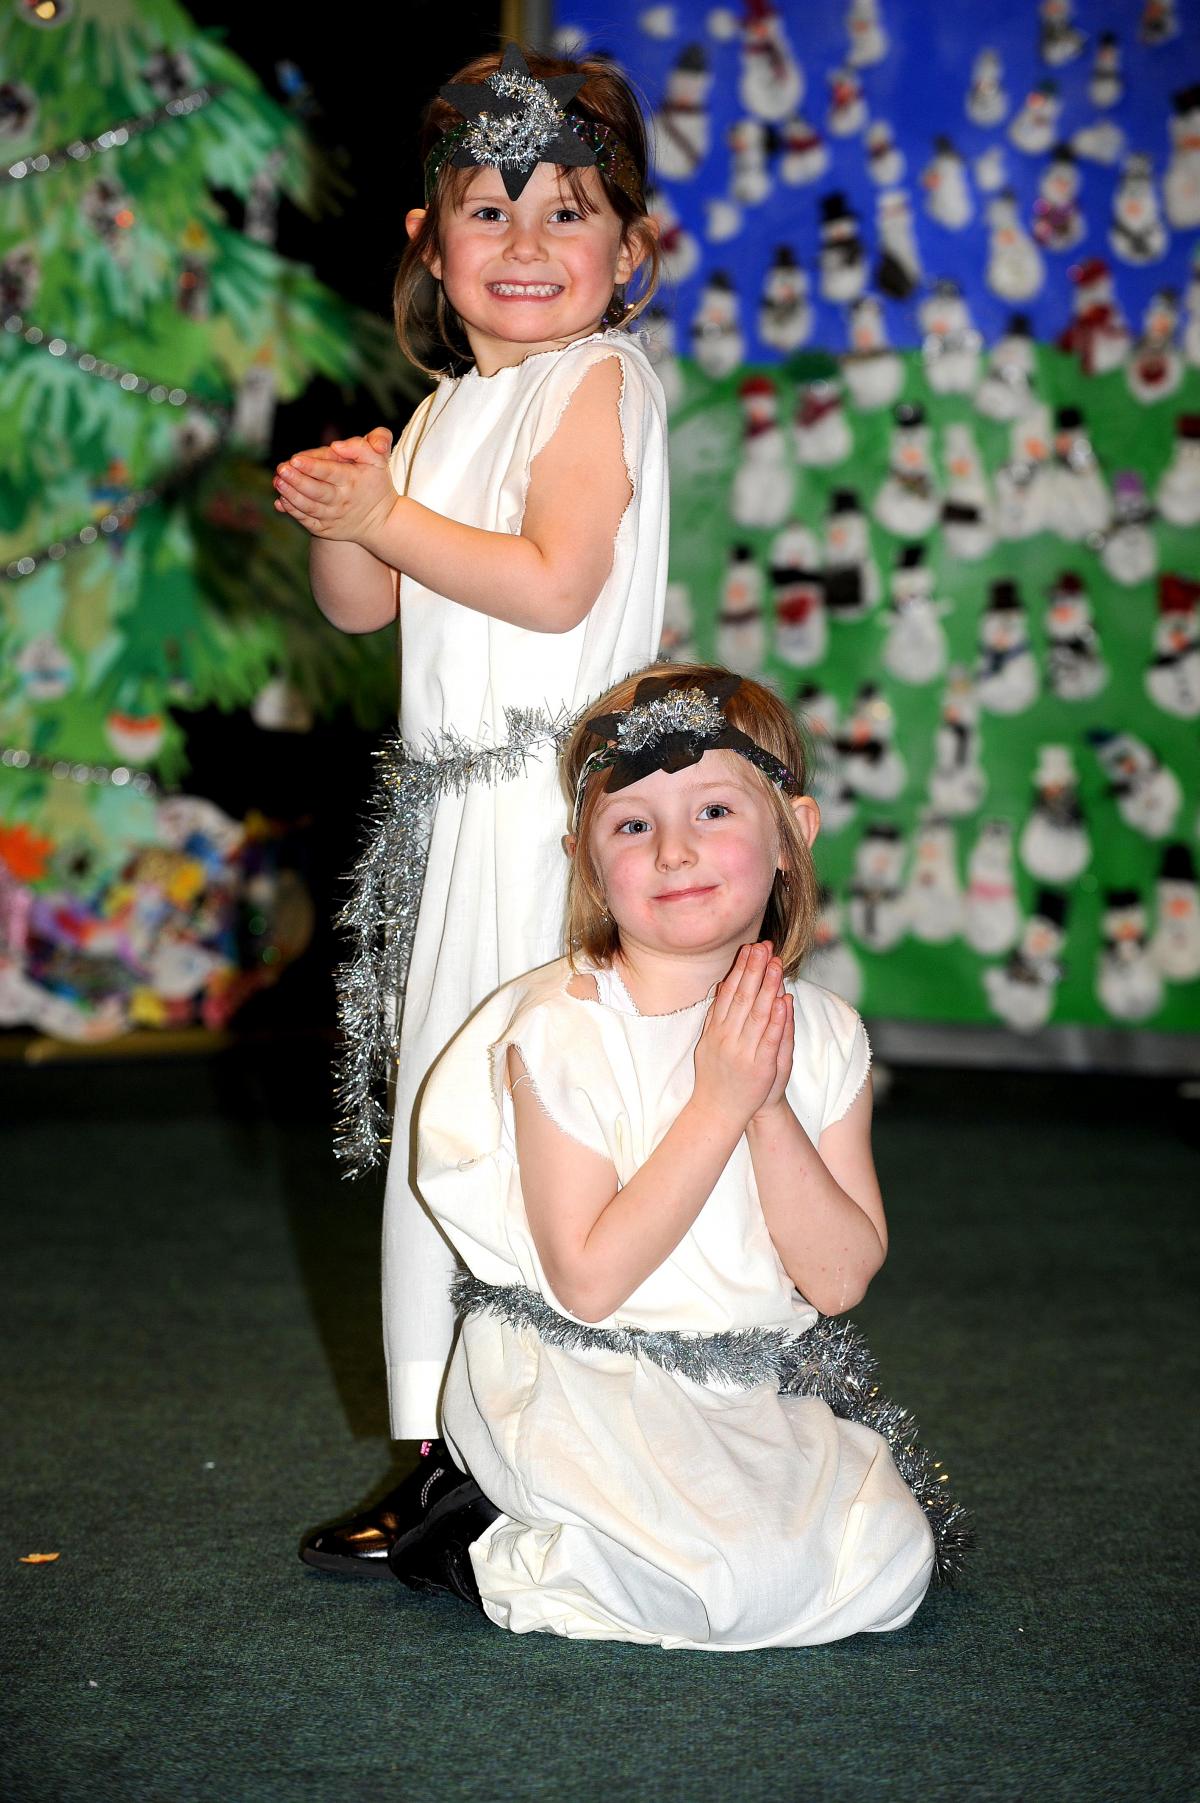 Taking part in Newhall Park Primary School Nativity 'Christmas Around the World' were Mackenzie Smith and Amy Hartshorne